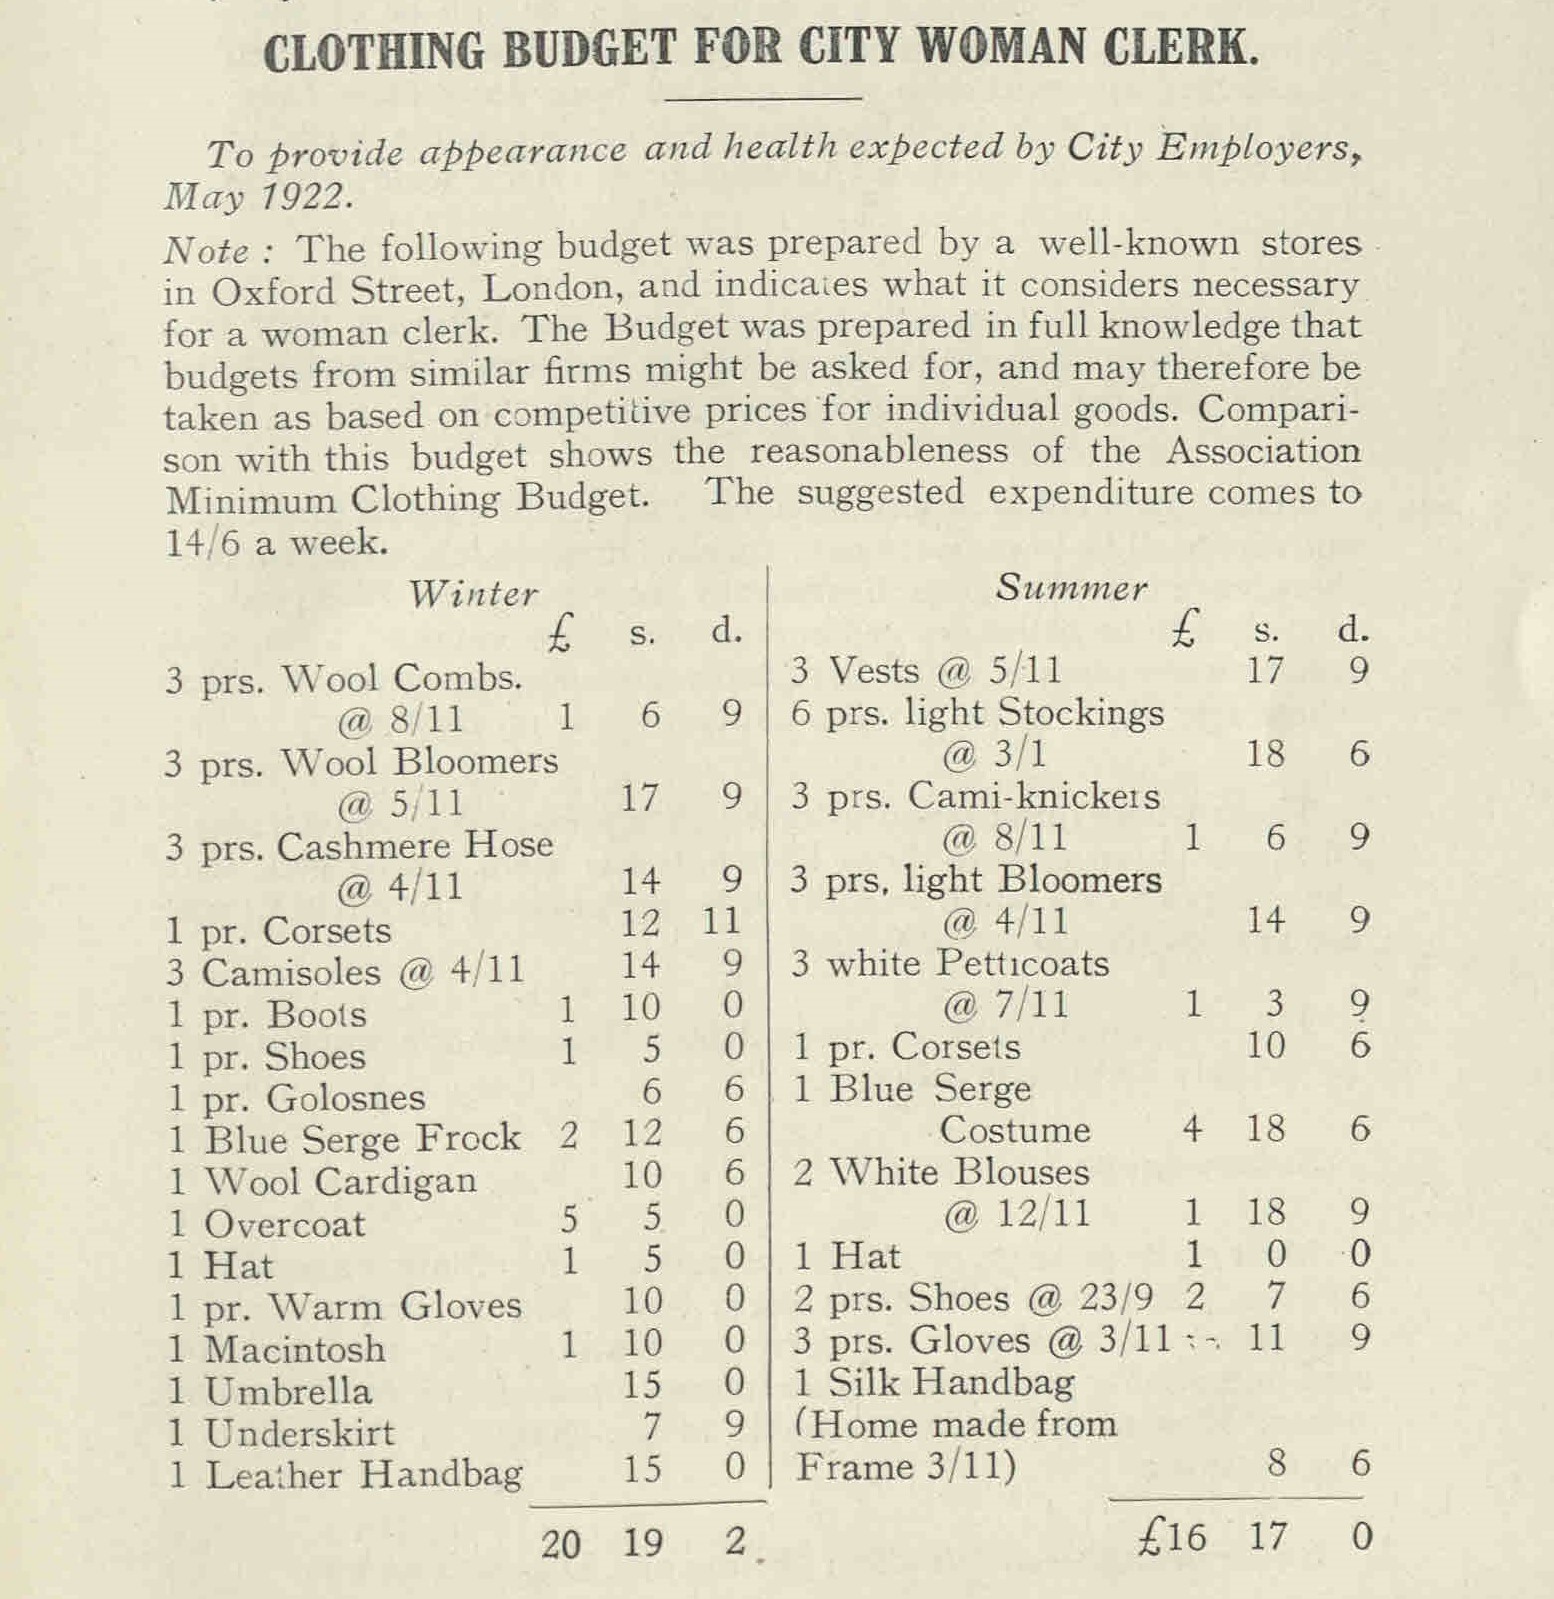 Information about the cost of winter and summer clothes "to provide appearance and health expected by City Employers", May 1922